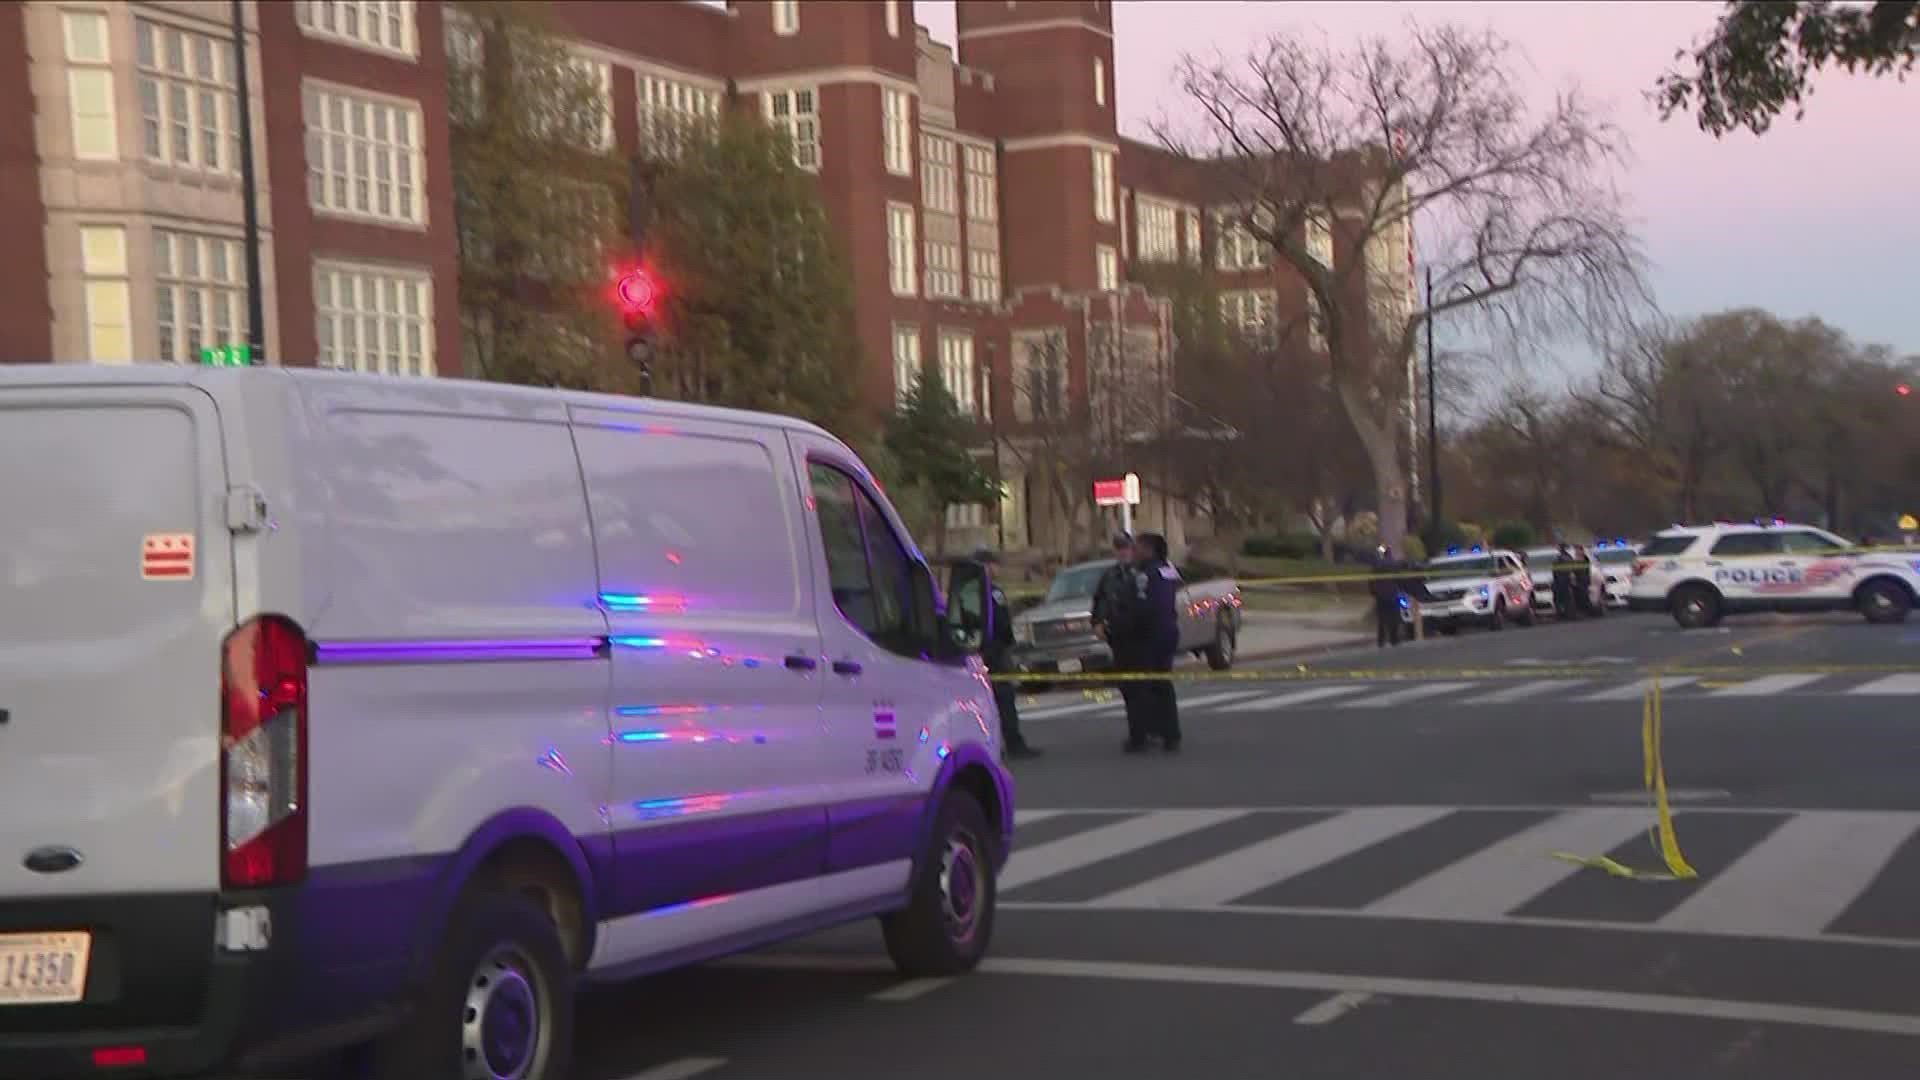 A 15-year-old boy was shot in the leg outside of a high school football game in Northeast D.C. on Thanksgiving. DC police said the shooting of the teen was targeted.